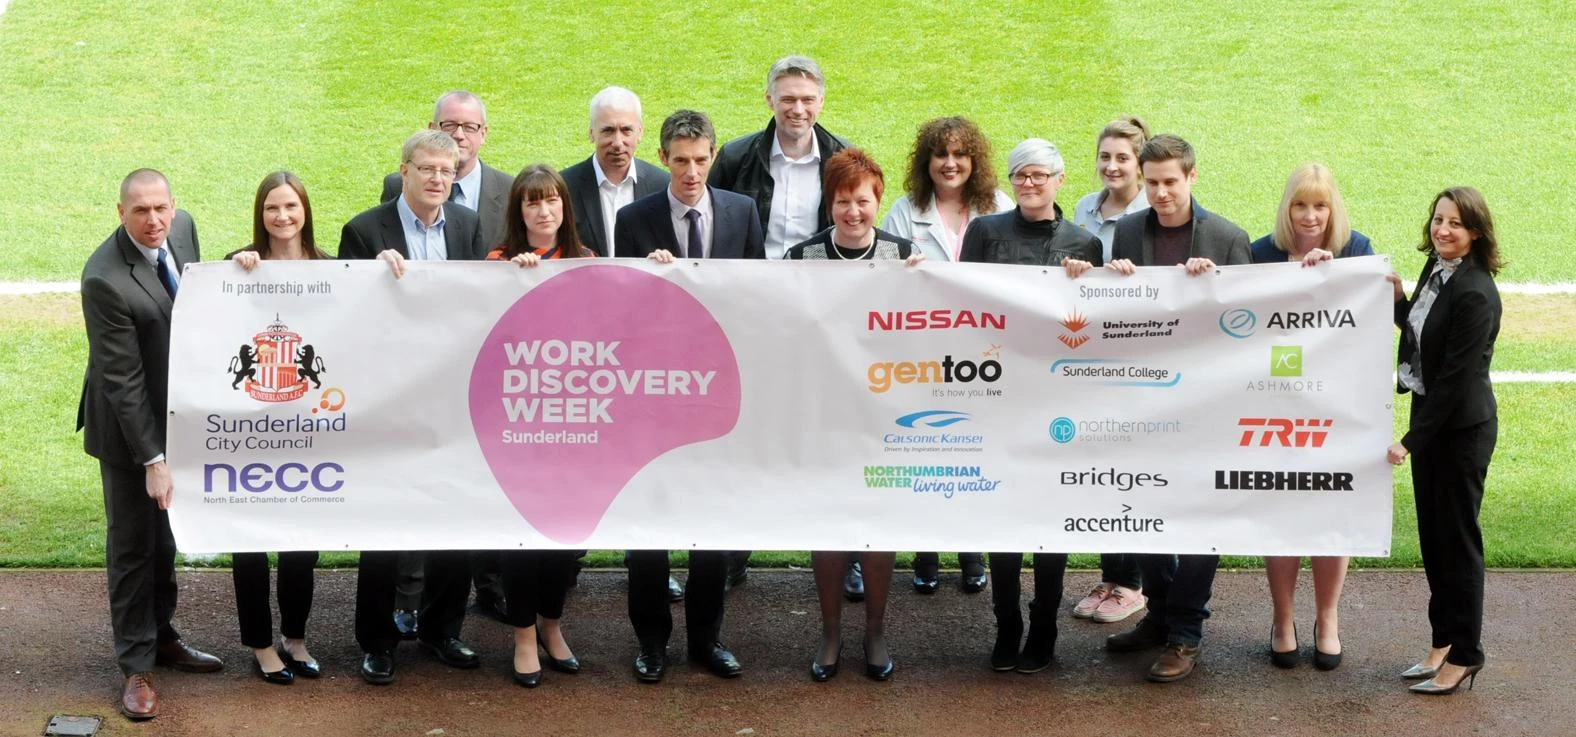 Some of the sponsors launching last year's Work Discovery Week 